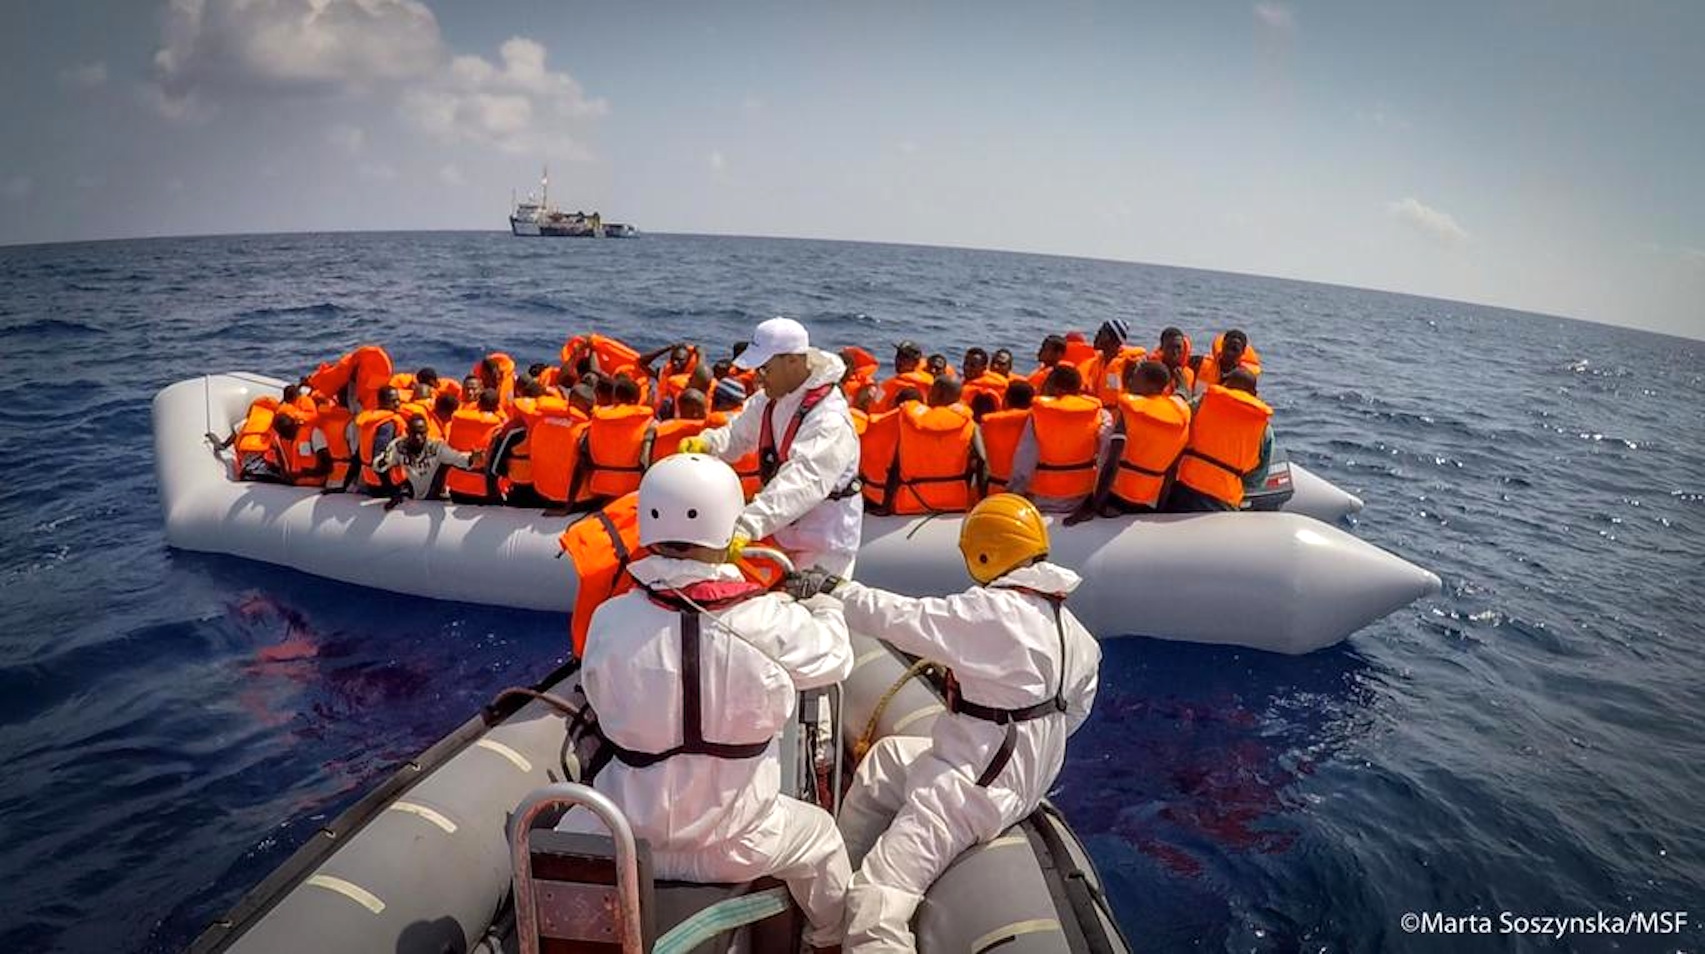 MSF's Dignity I on the scene of a shipwreck